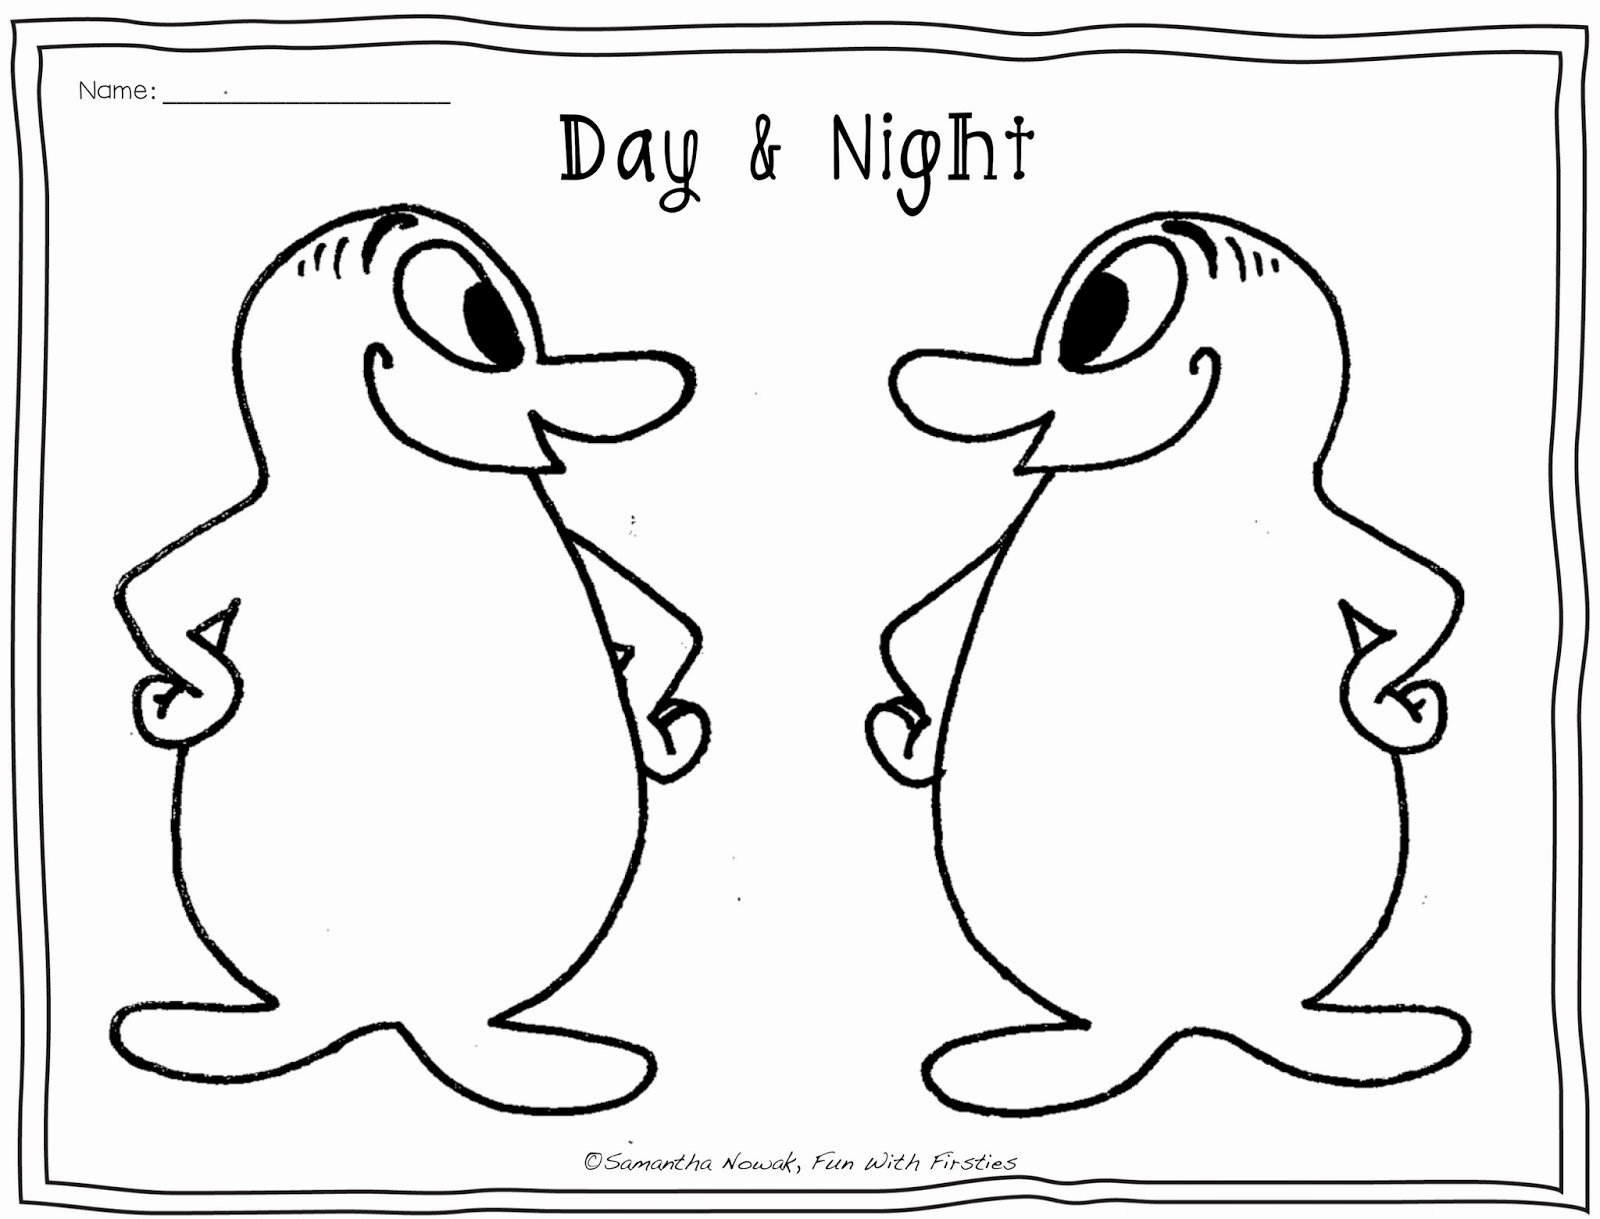 Day and Night Worksheet Best Of Fun with Firsties Science &amp; Writing Freebies